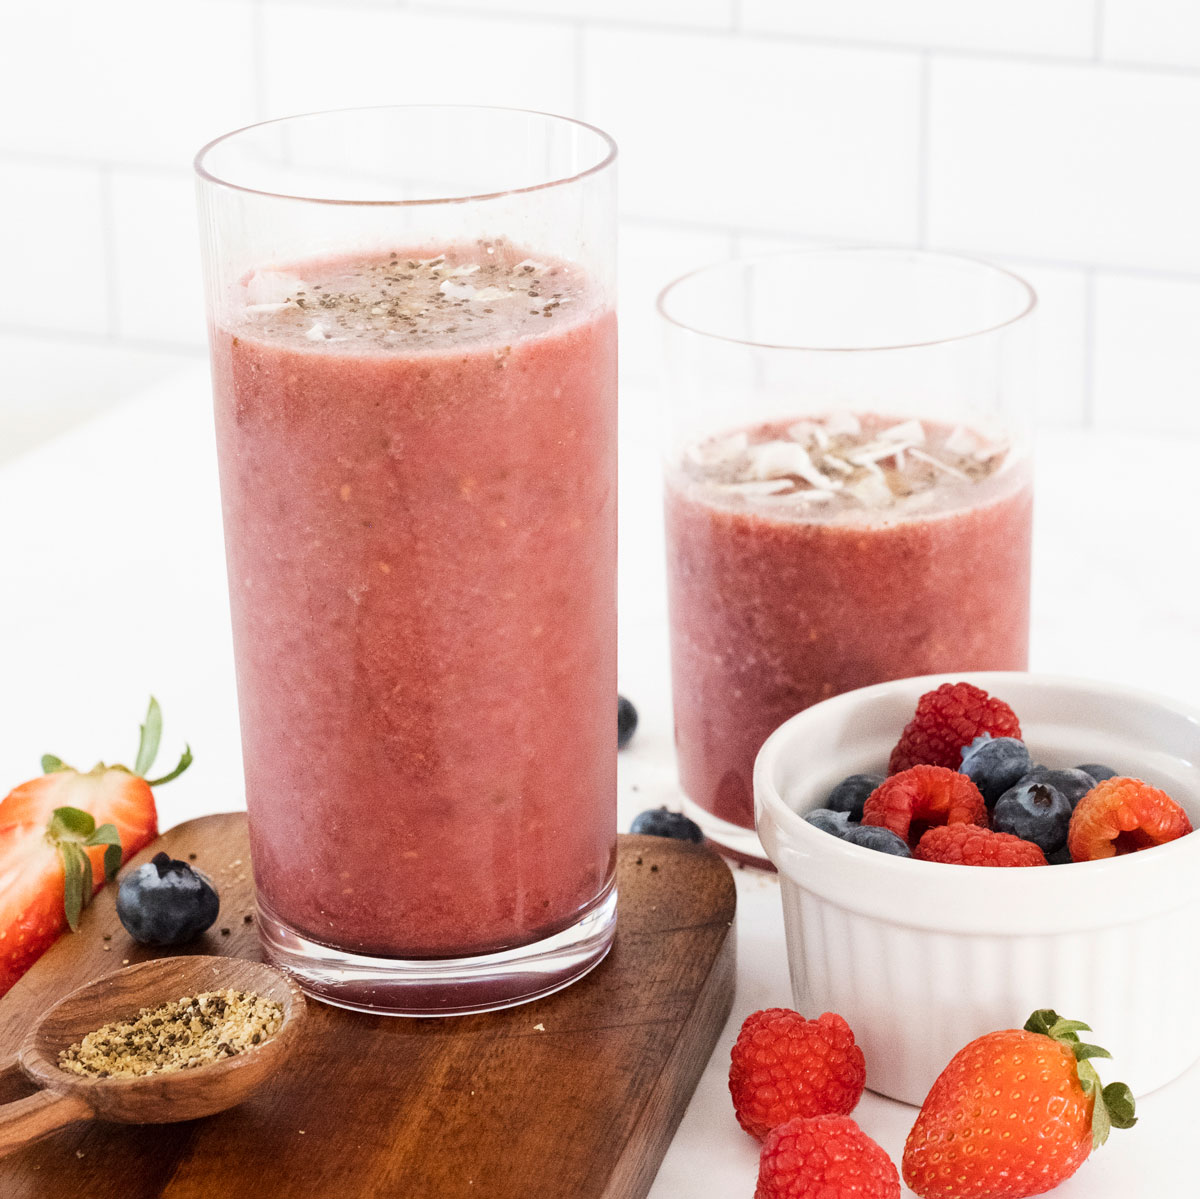 Refreshing and Delicious: How to Make the Perfect Strawberry Smoothie